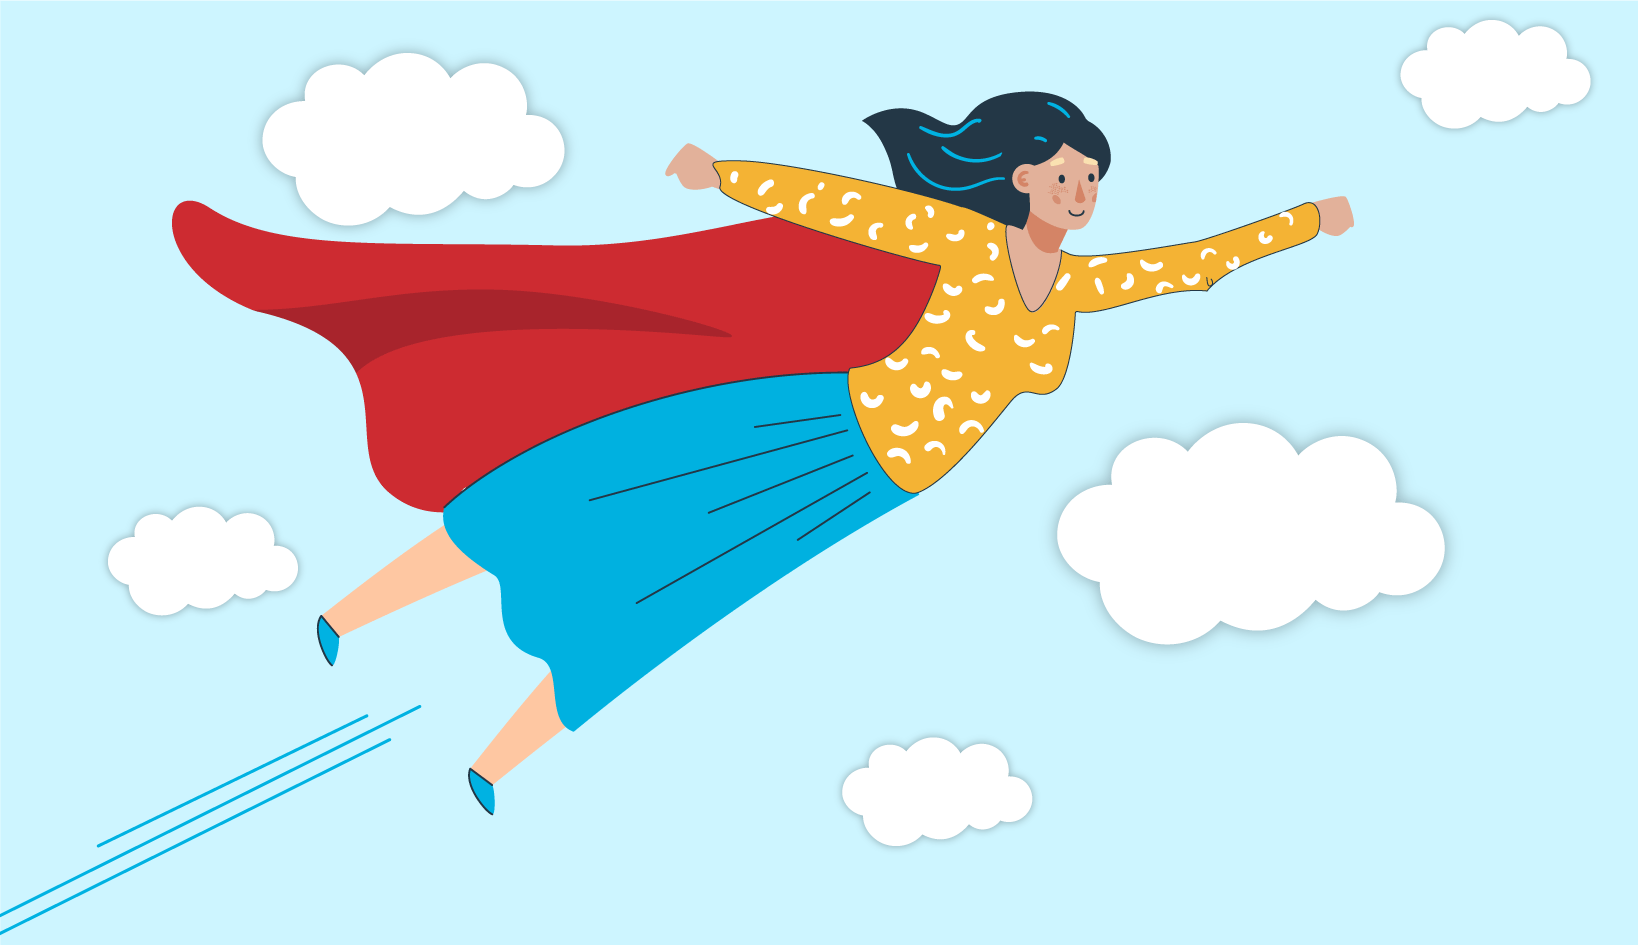 Woman in flying through the sky with a red cape.